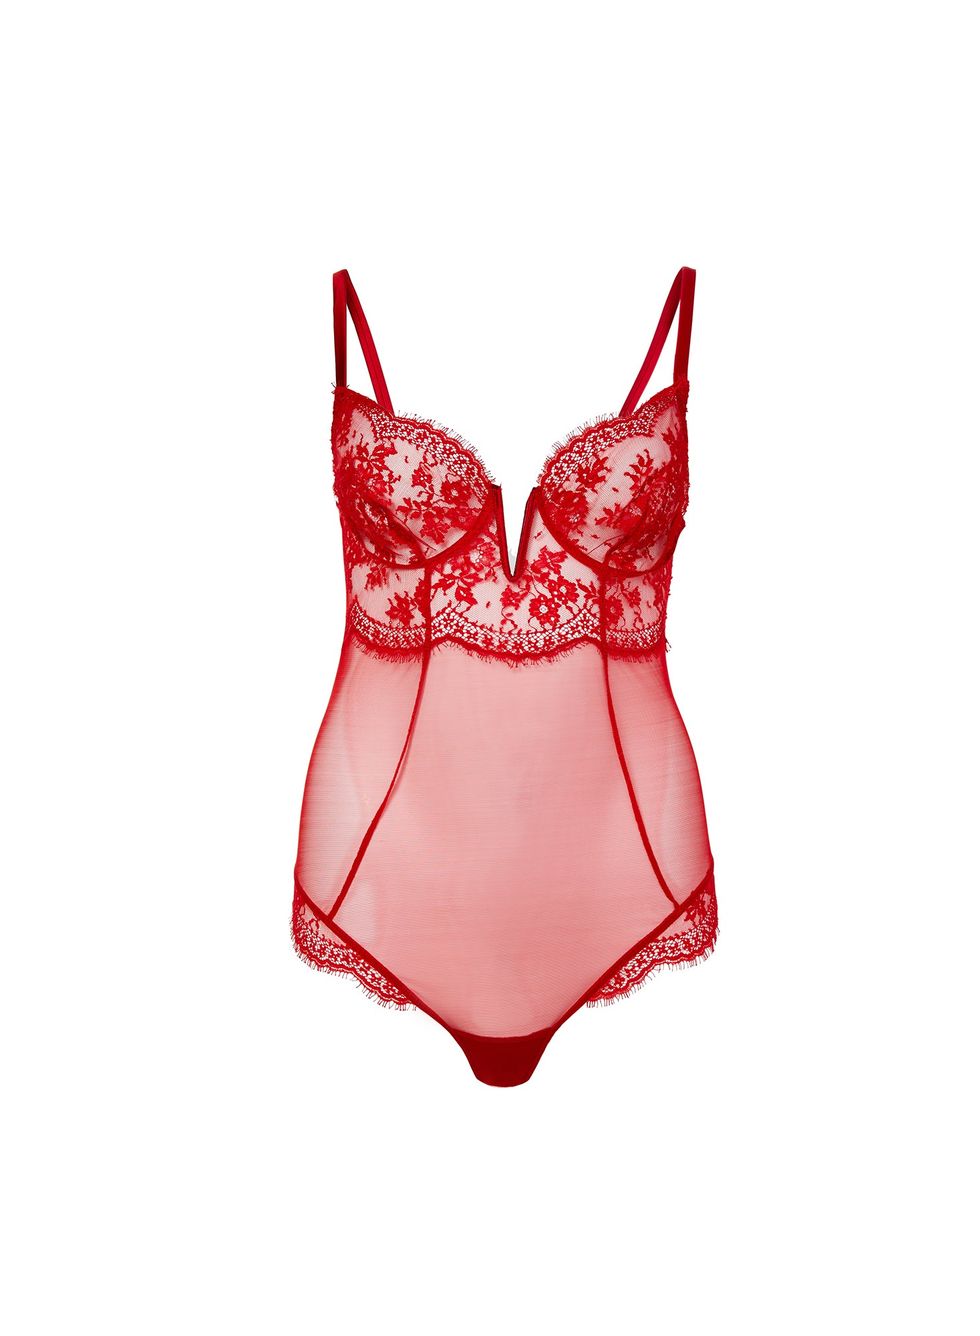 Experts offer a guy's guide to sexy Valentine's lingerie